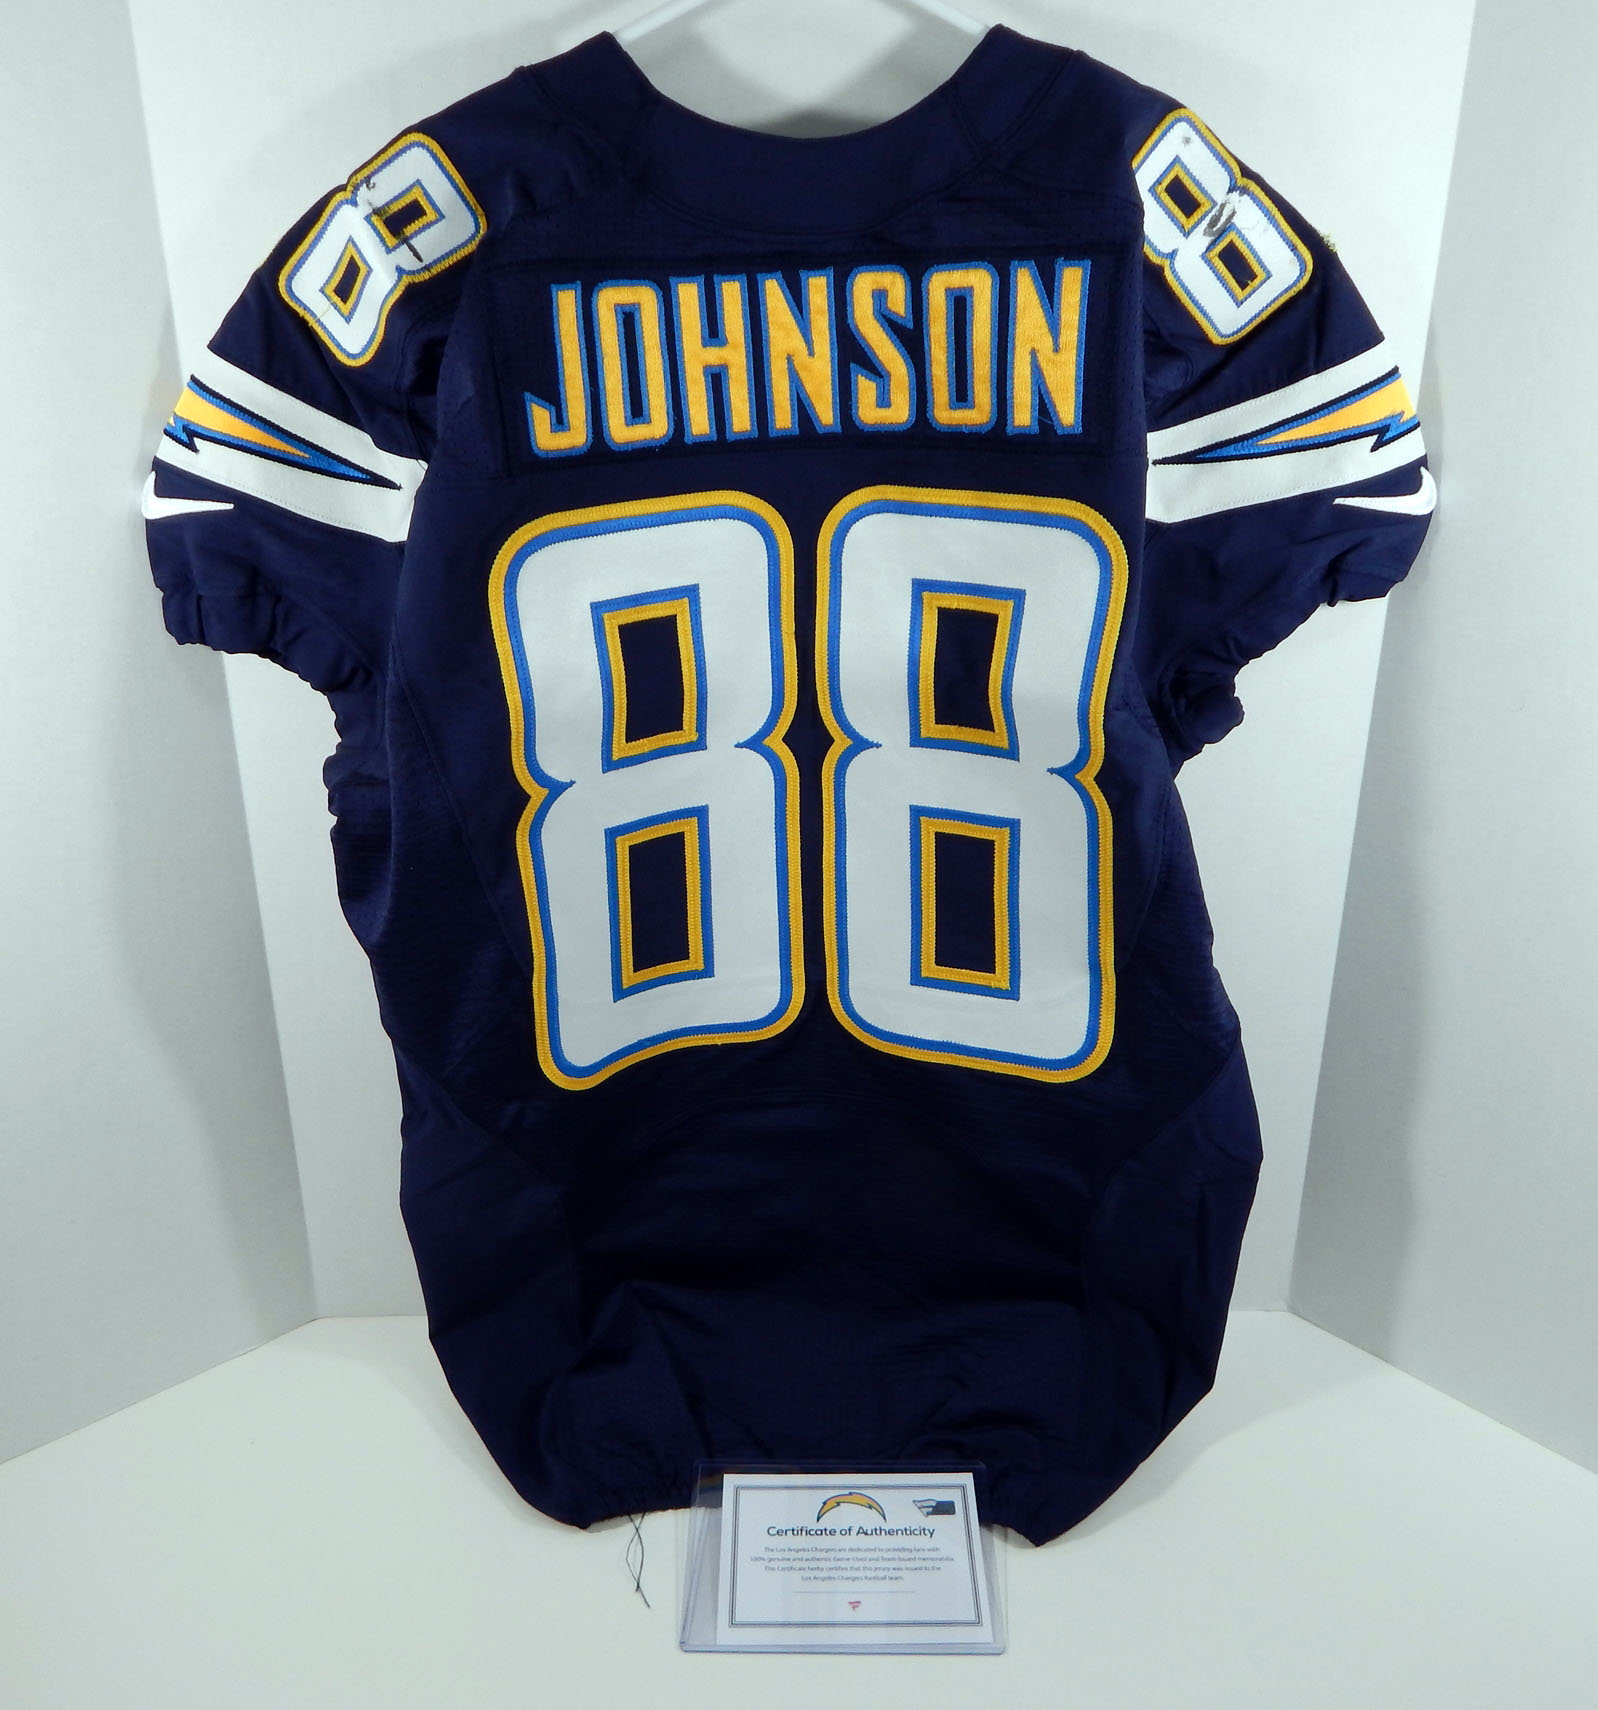 chargers 2015 jersey